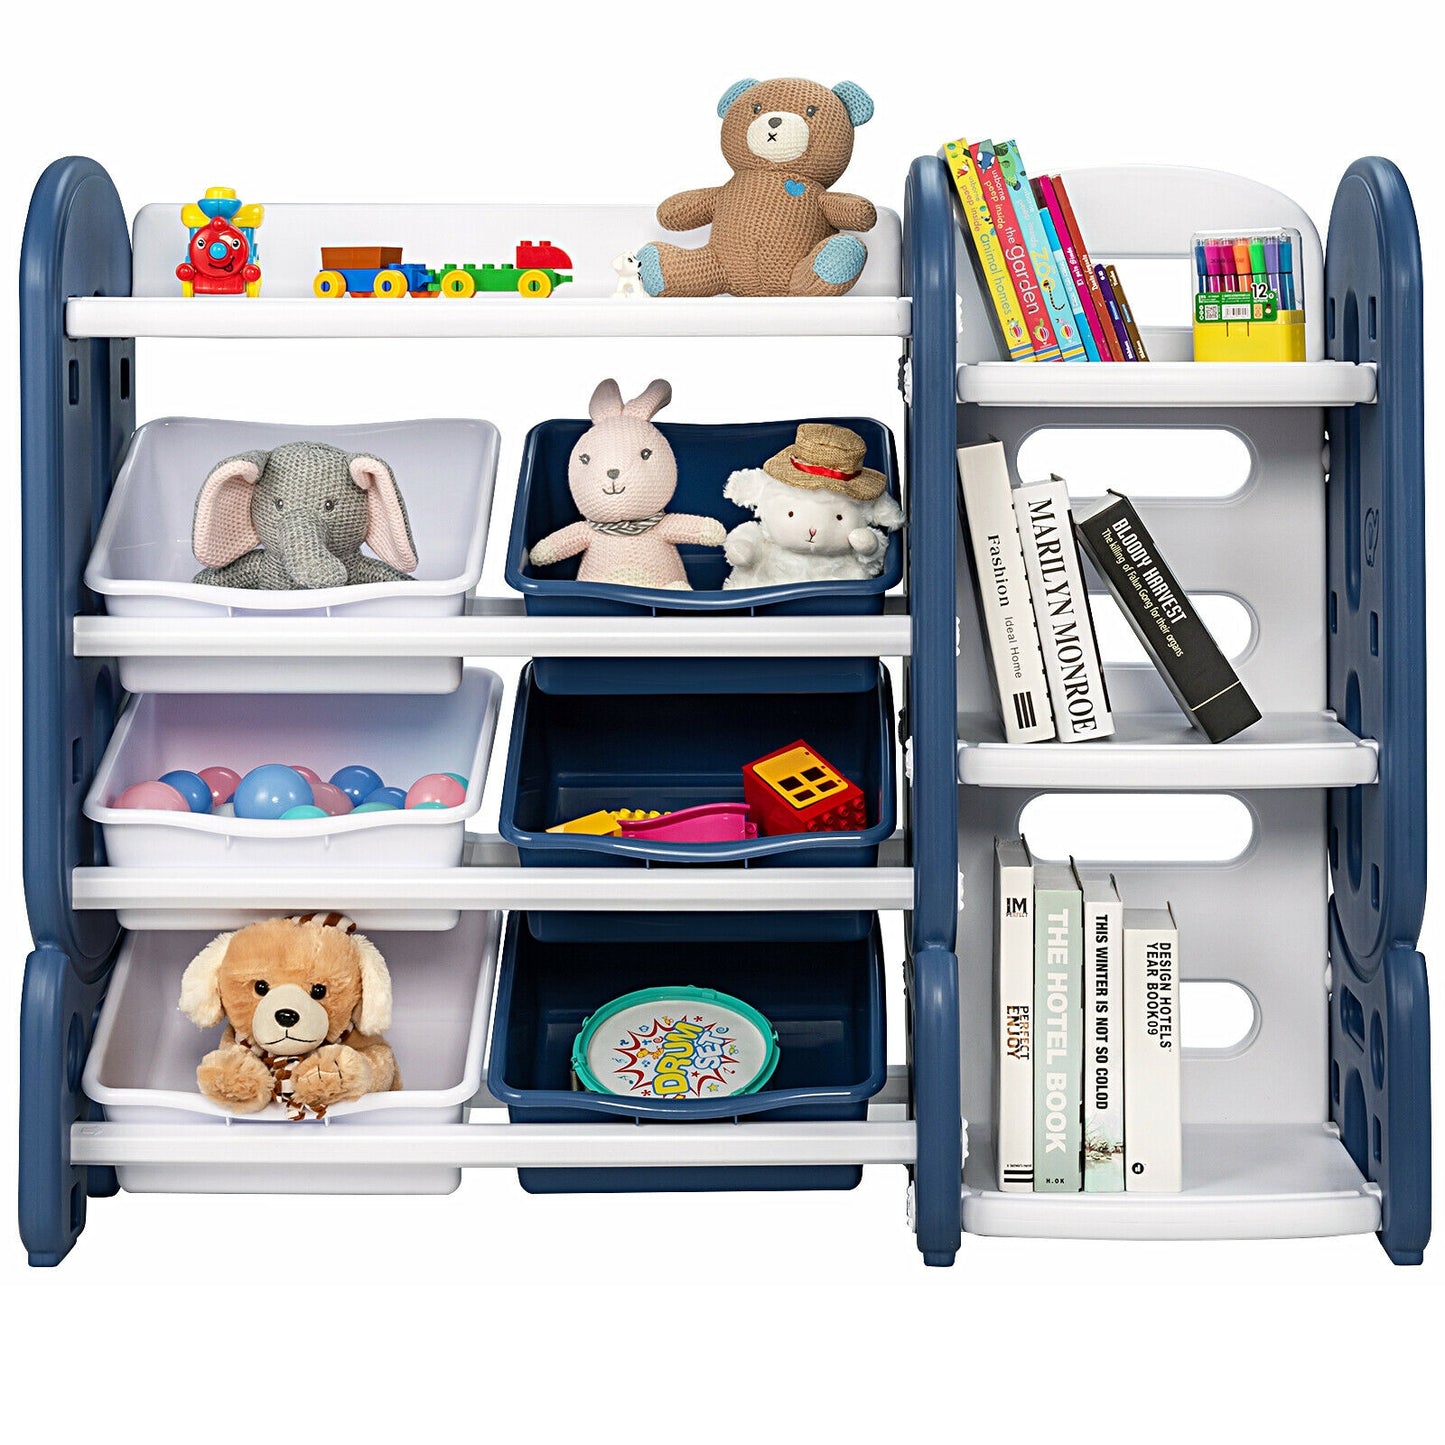 Kids Toy Storage Organizer with Bins and Multi-Layer Shelf for Bedroom Playroom-Blue